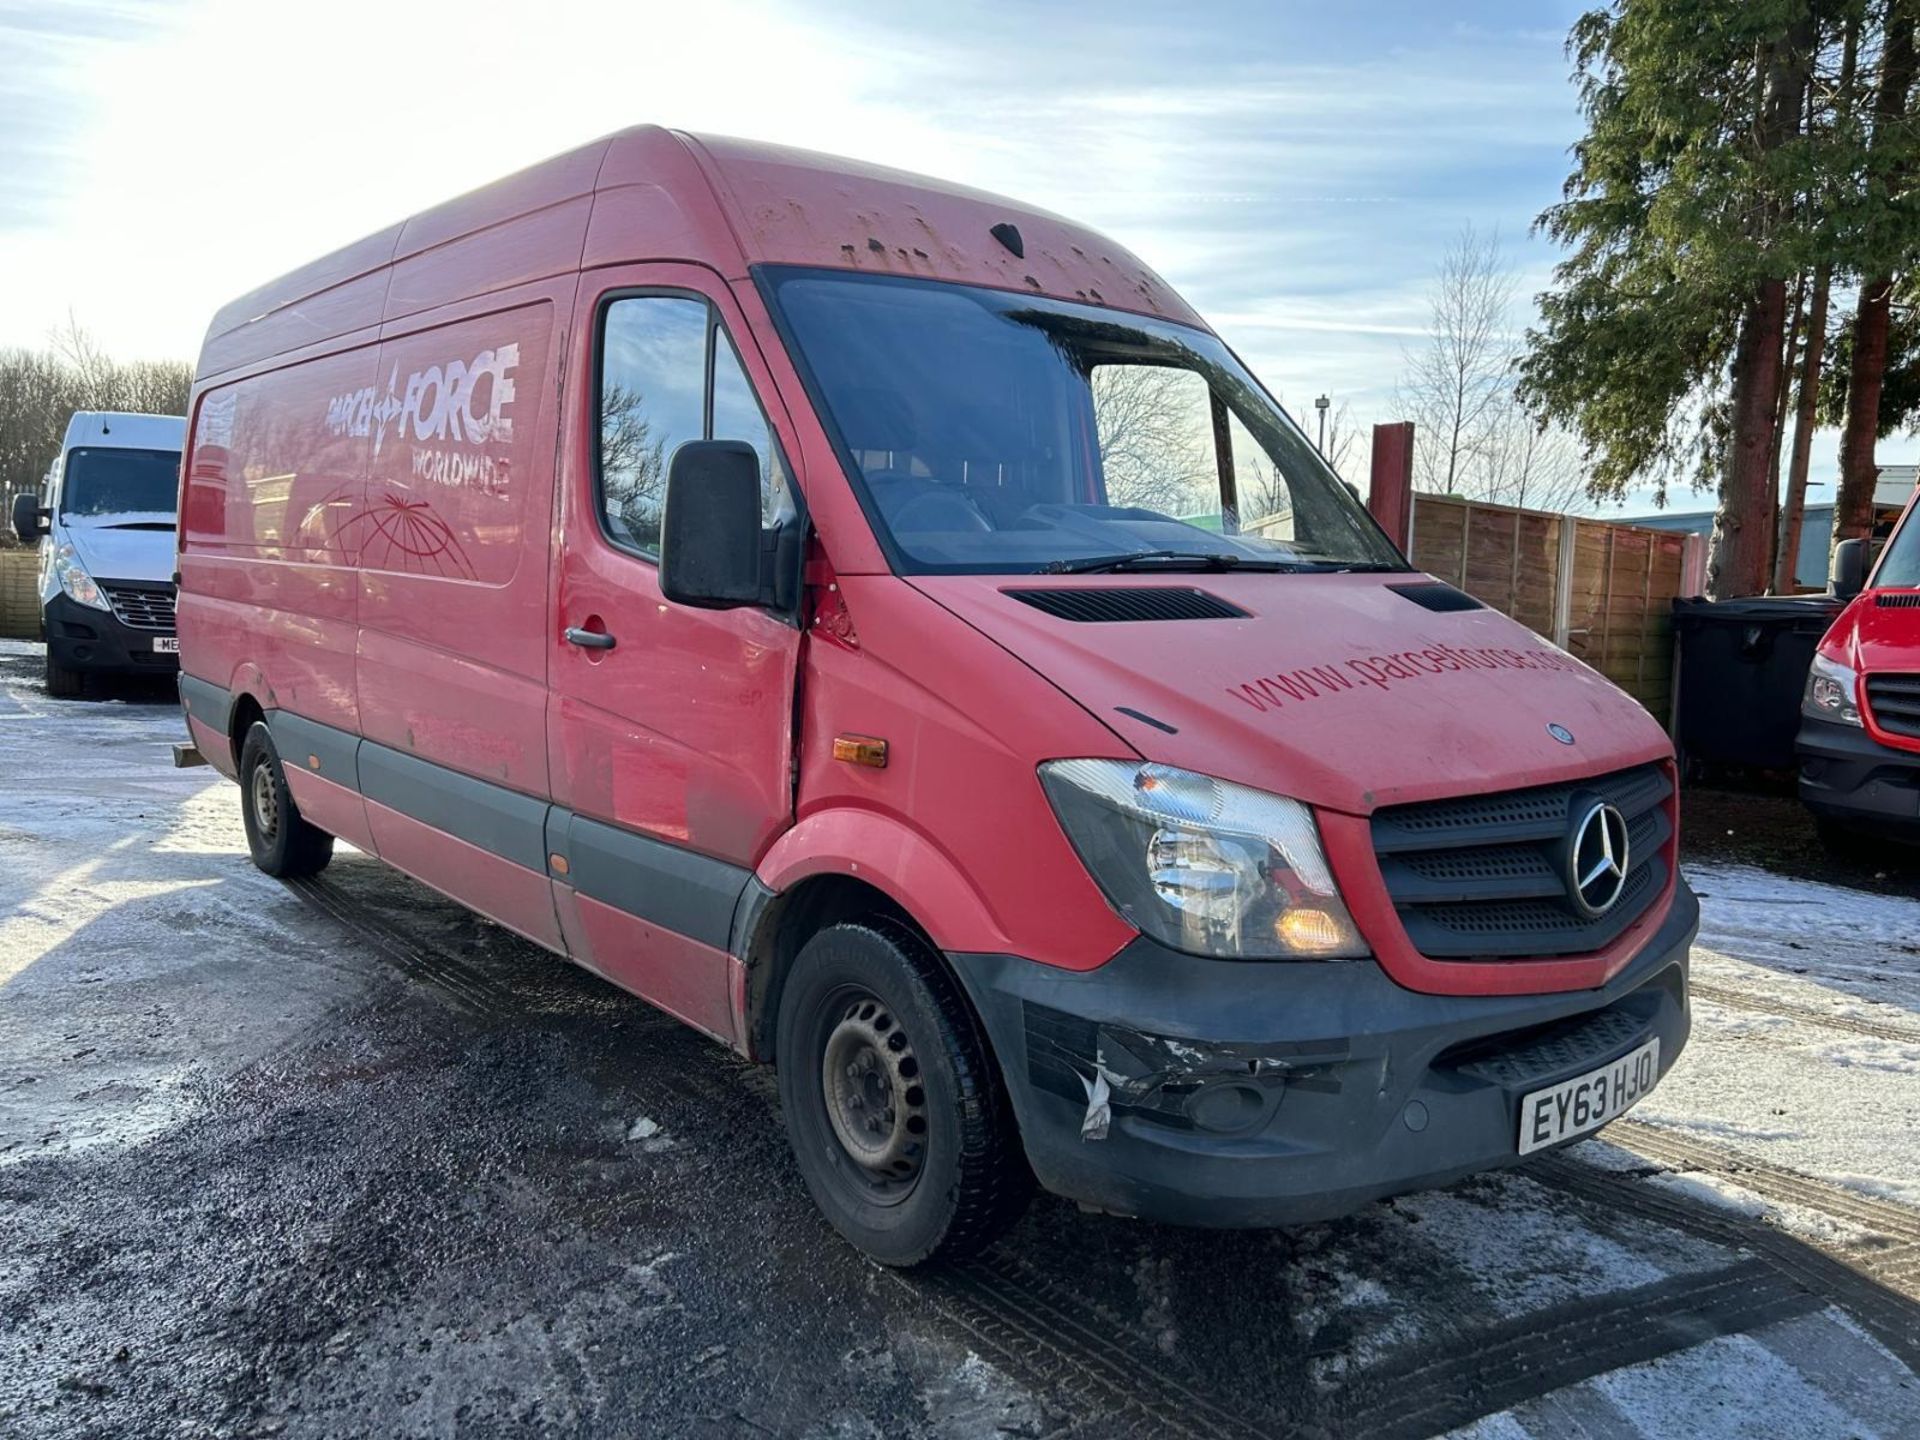 UNMATCHED RESILIENCE: 2013 MERCEDES SPRINTER 310 CDI - LONG WHEELBASE, HIGH ROOF - Image 4 of 12